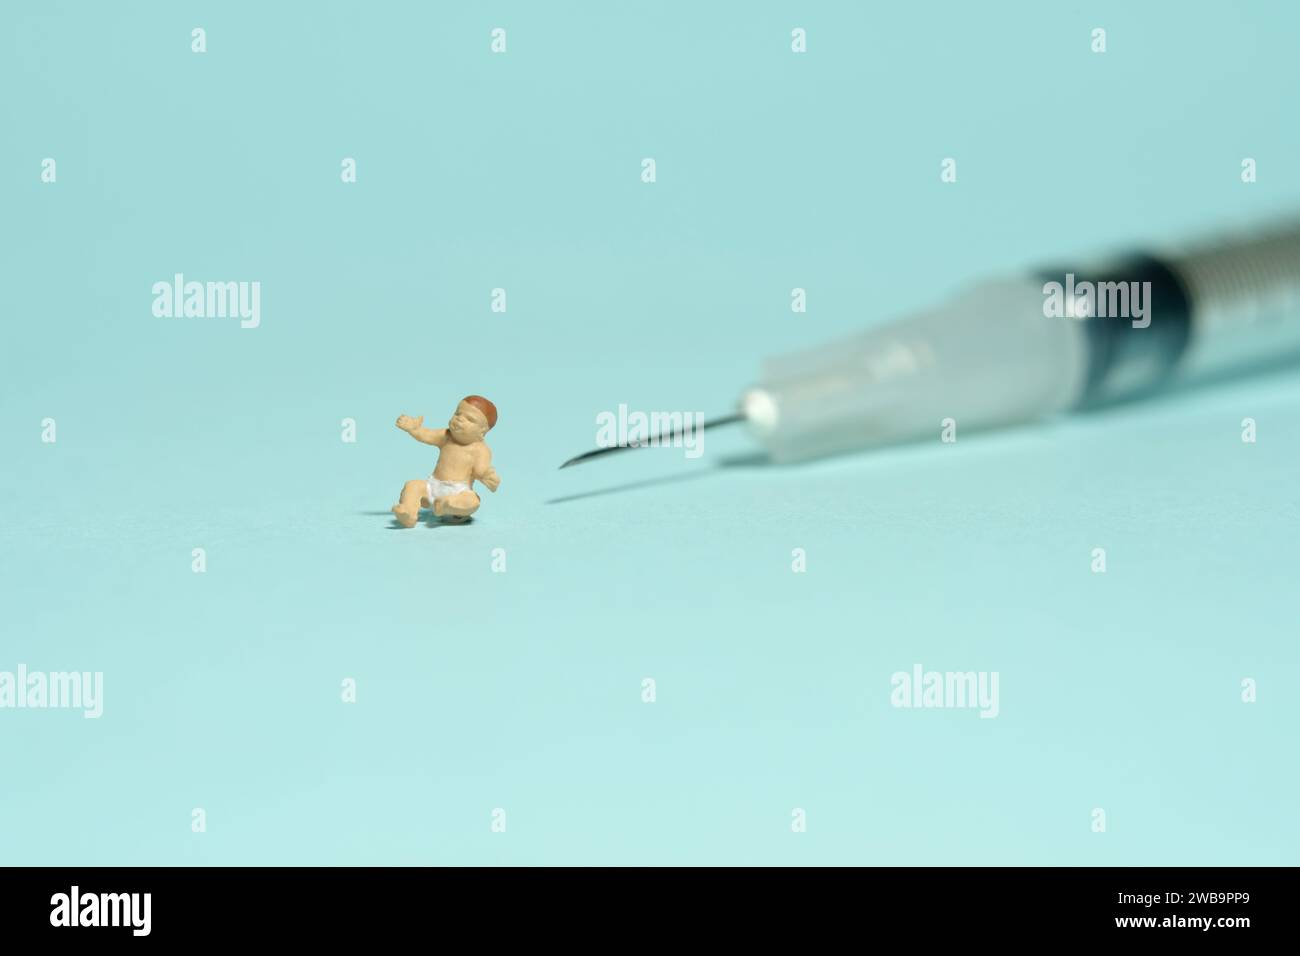 Miniature tiny people toy figure photography. A boy toddler infant baby seat in front of needle syringe. Isolated on blue background. Image photo Stock Photo